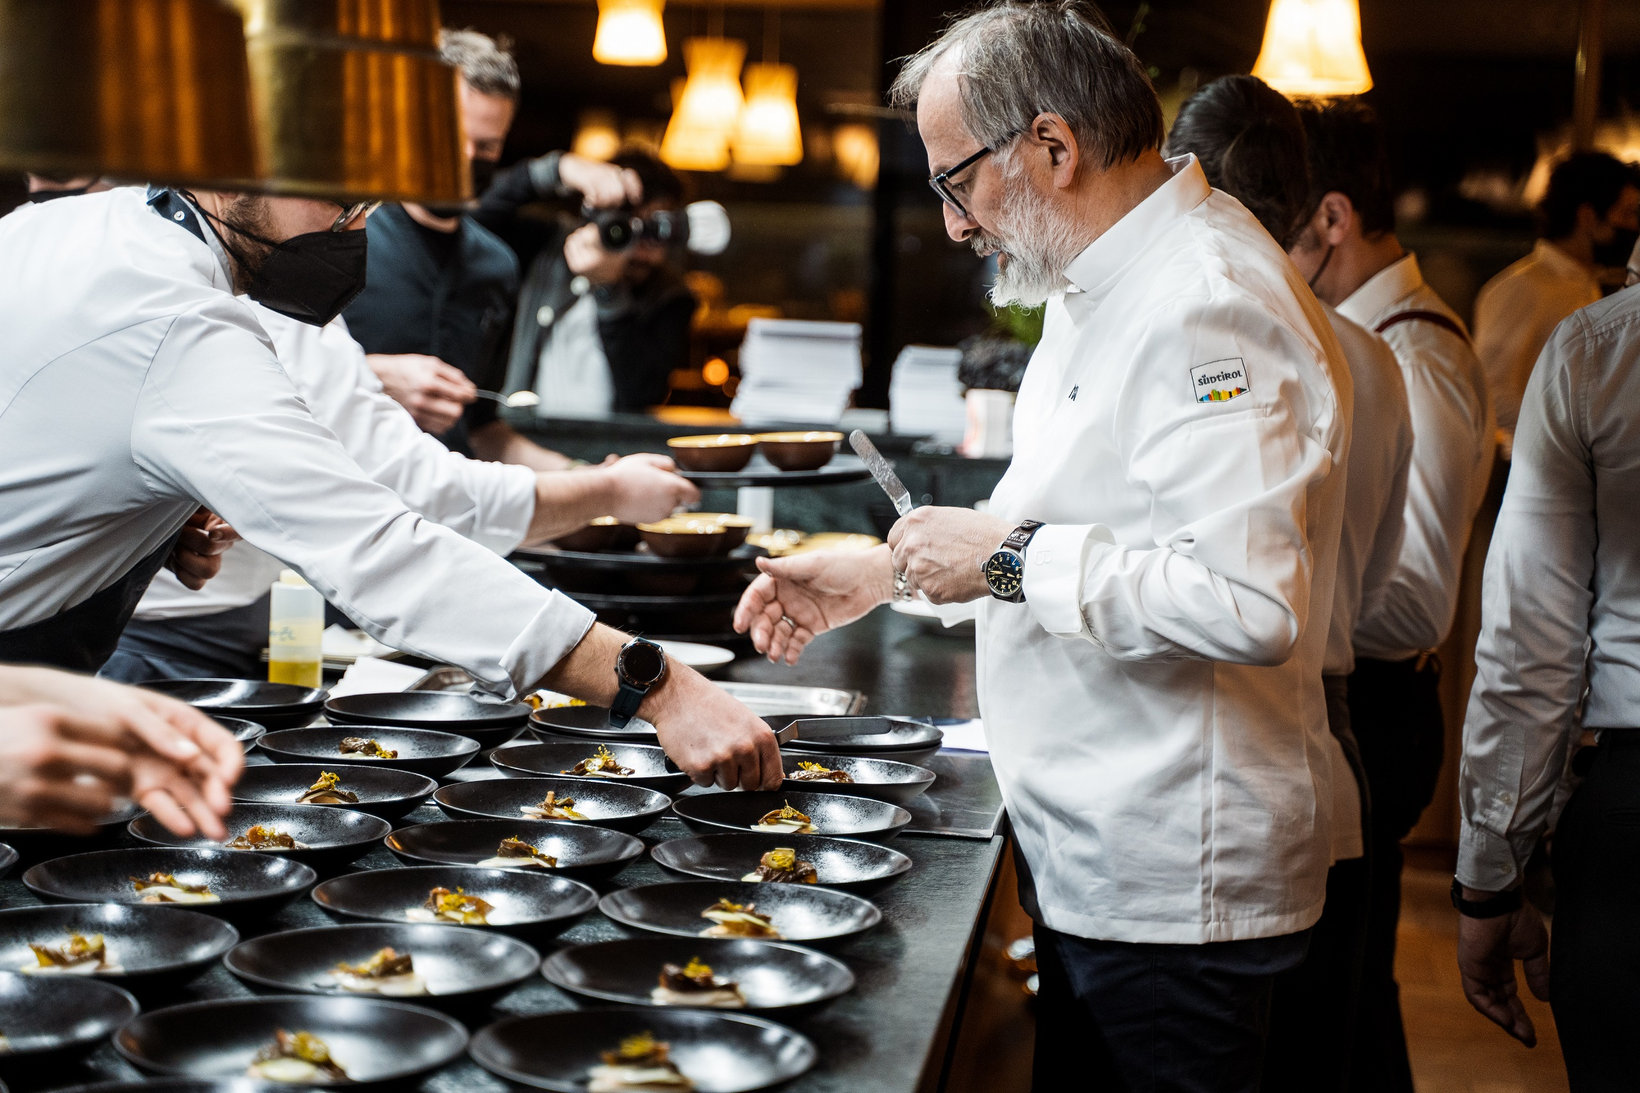 Celebrity chef Norbert Niederkofler inspects dishes before serving them in the AlpINN kitchen.